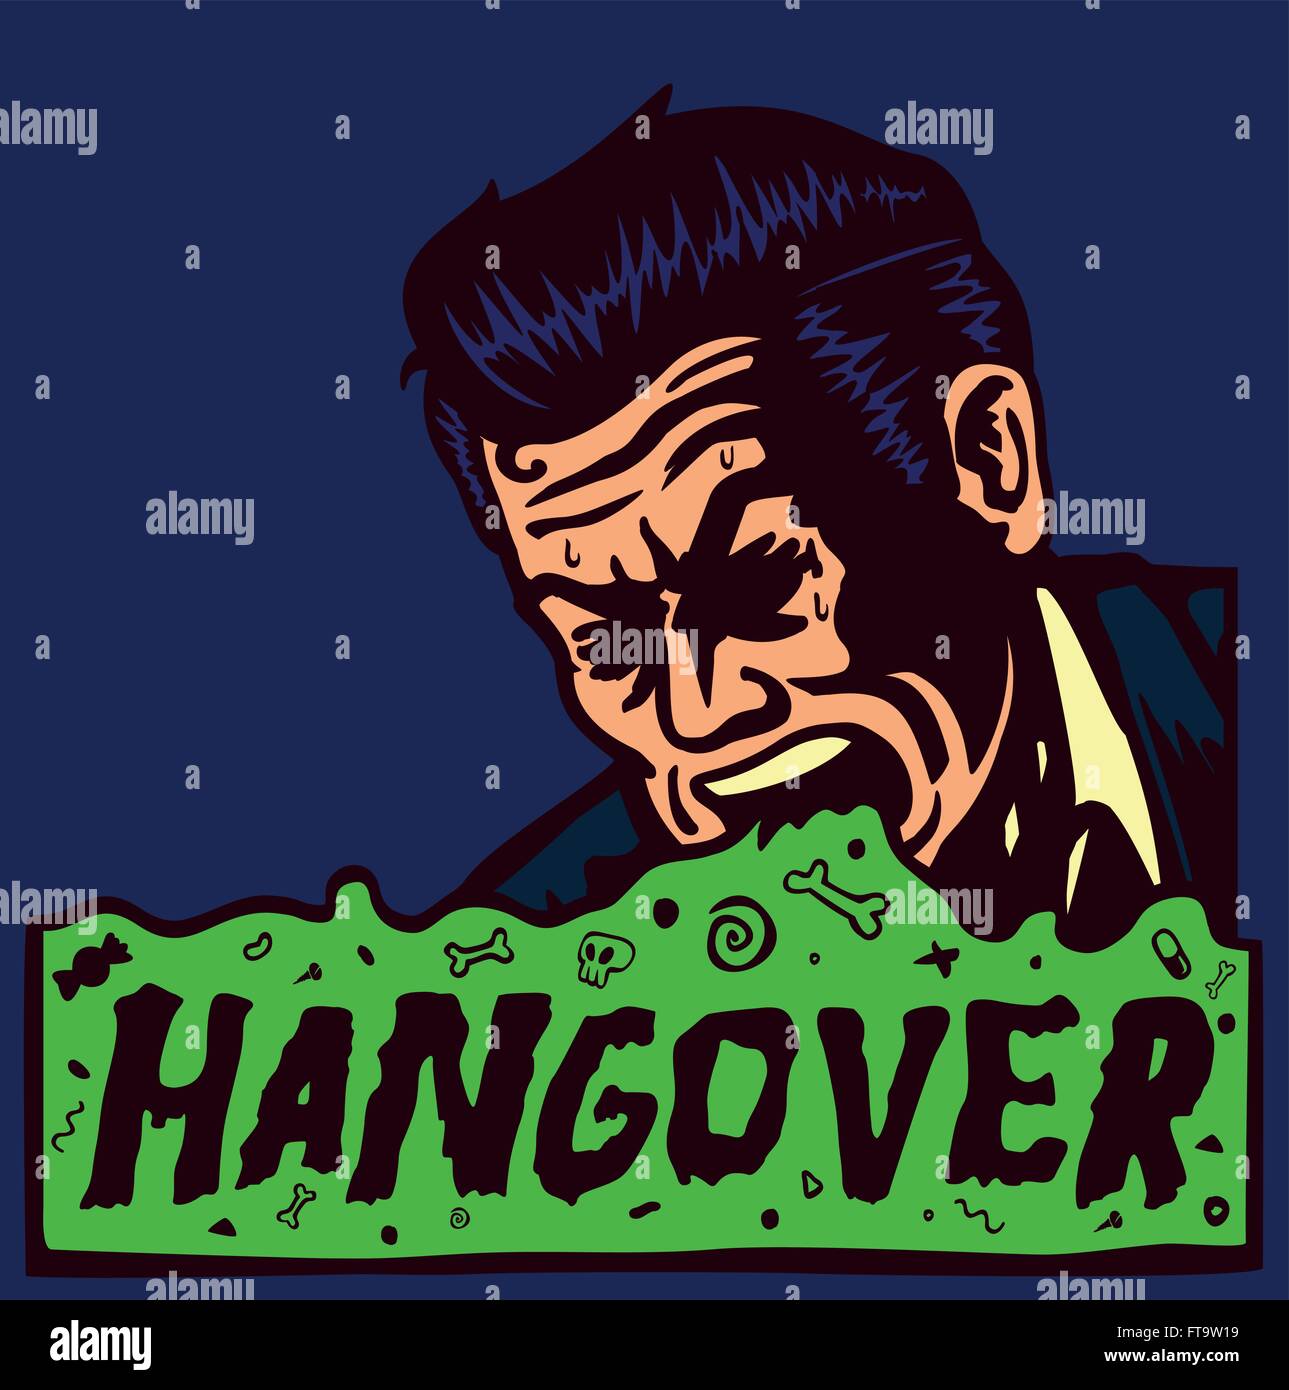 Hangover day after party, drunk sick vintage man vomiting, throwing up, alcohol abuse Stock Vector